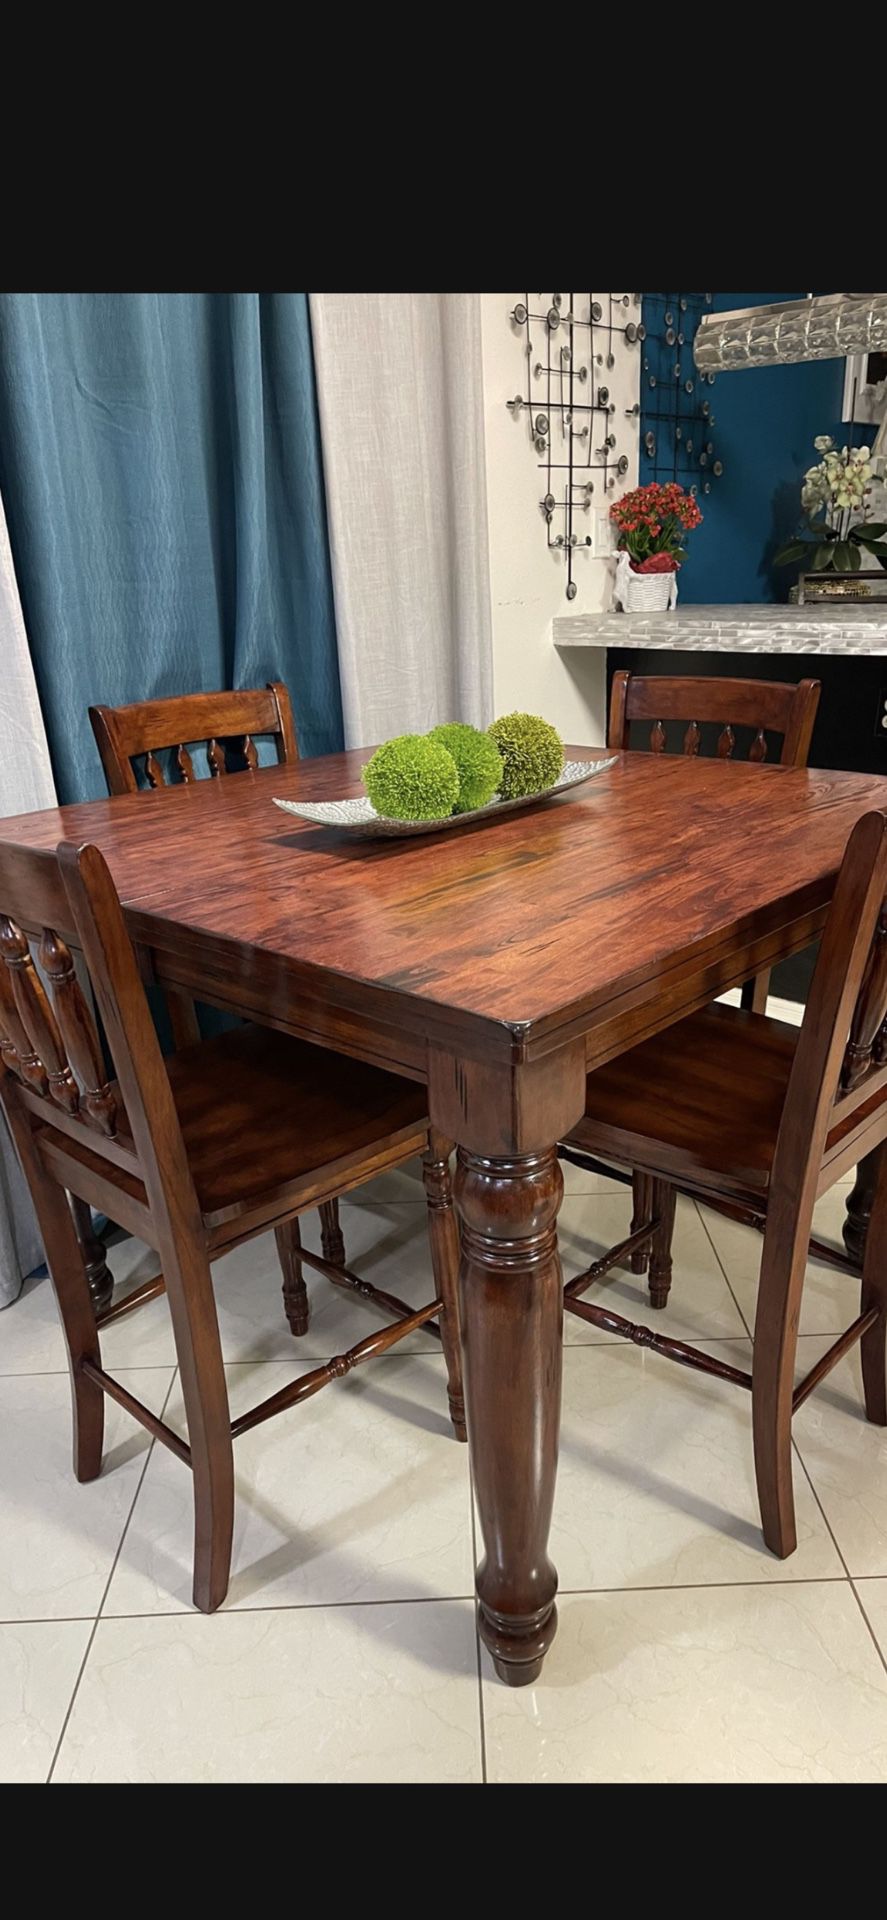 Solid Wood High Dining Table 48” X 48” And 36” High With 4 Chairs In Good Condition ( No Scratches And Very Sturdy) 